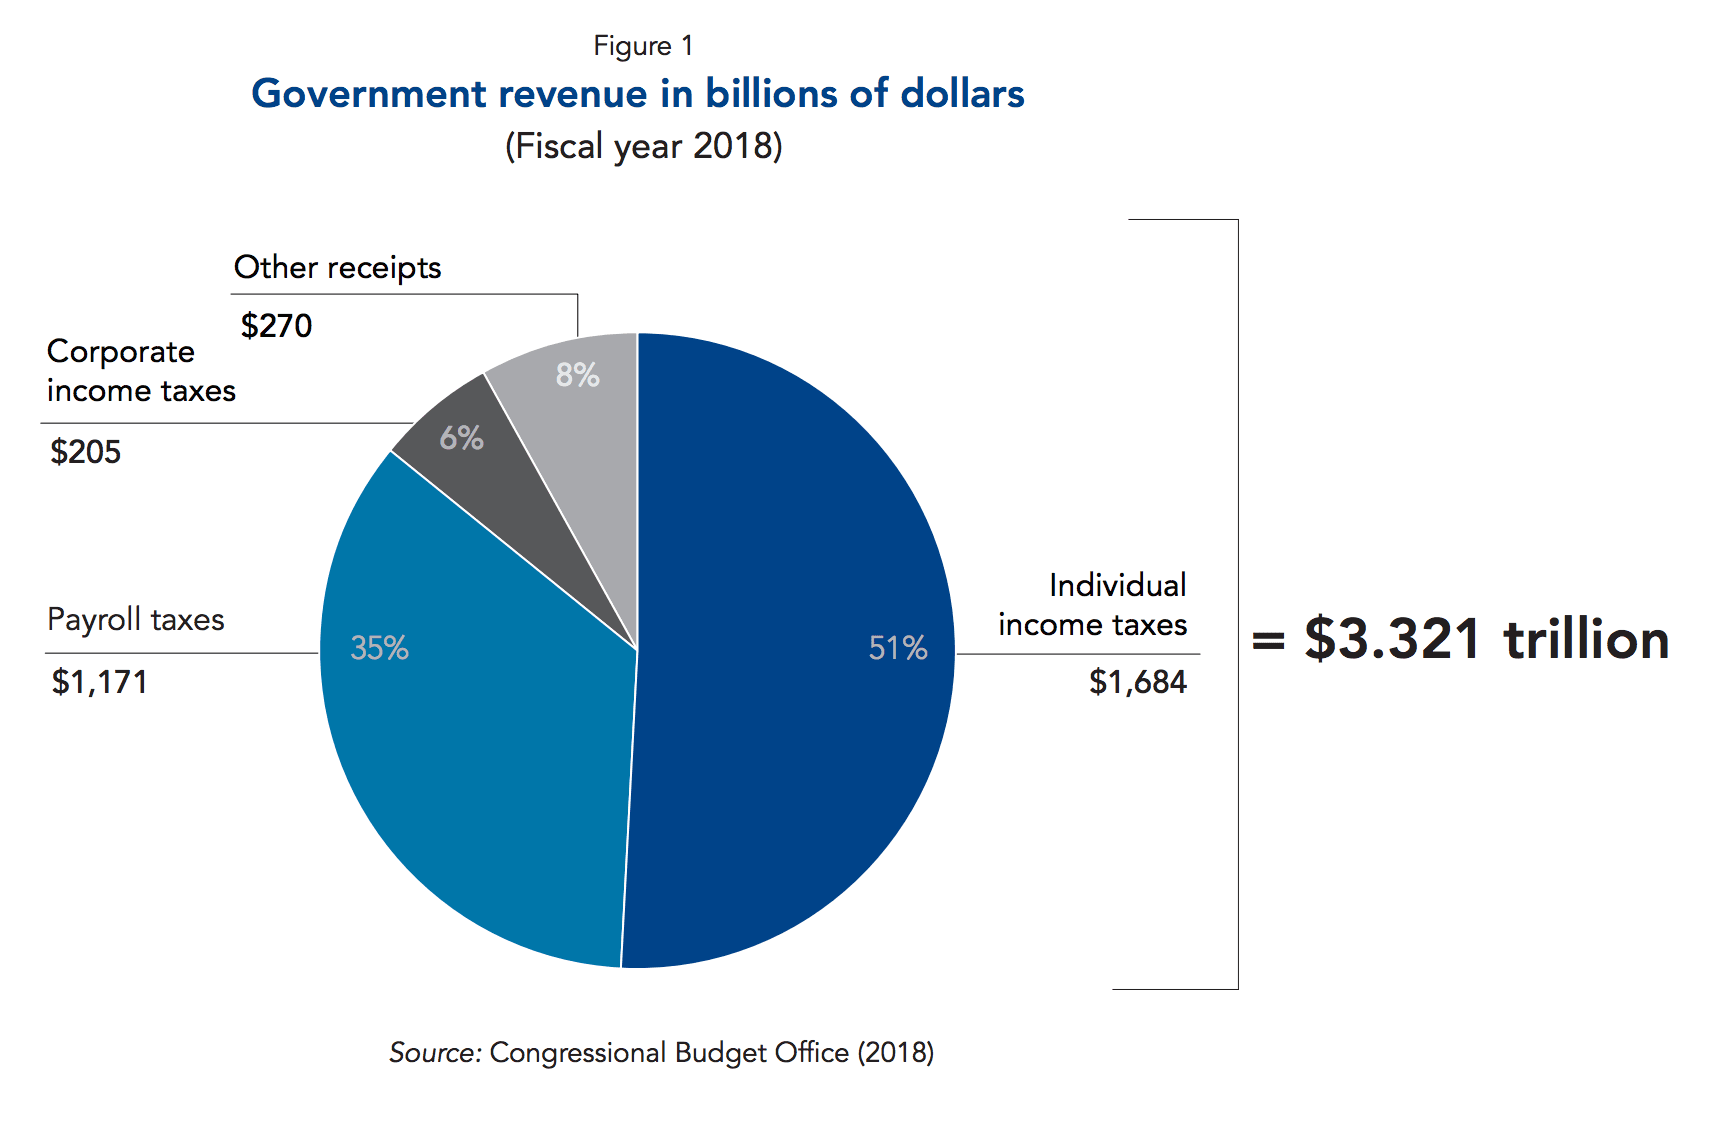 A pie chart containing the breakdown of our national government’s revenue sources.